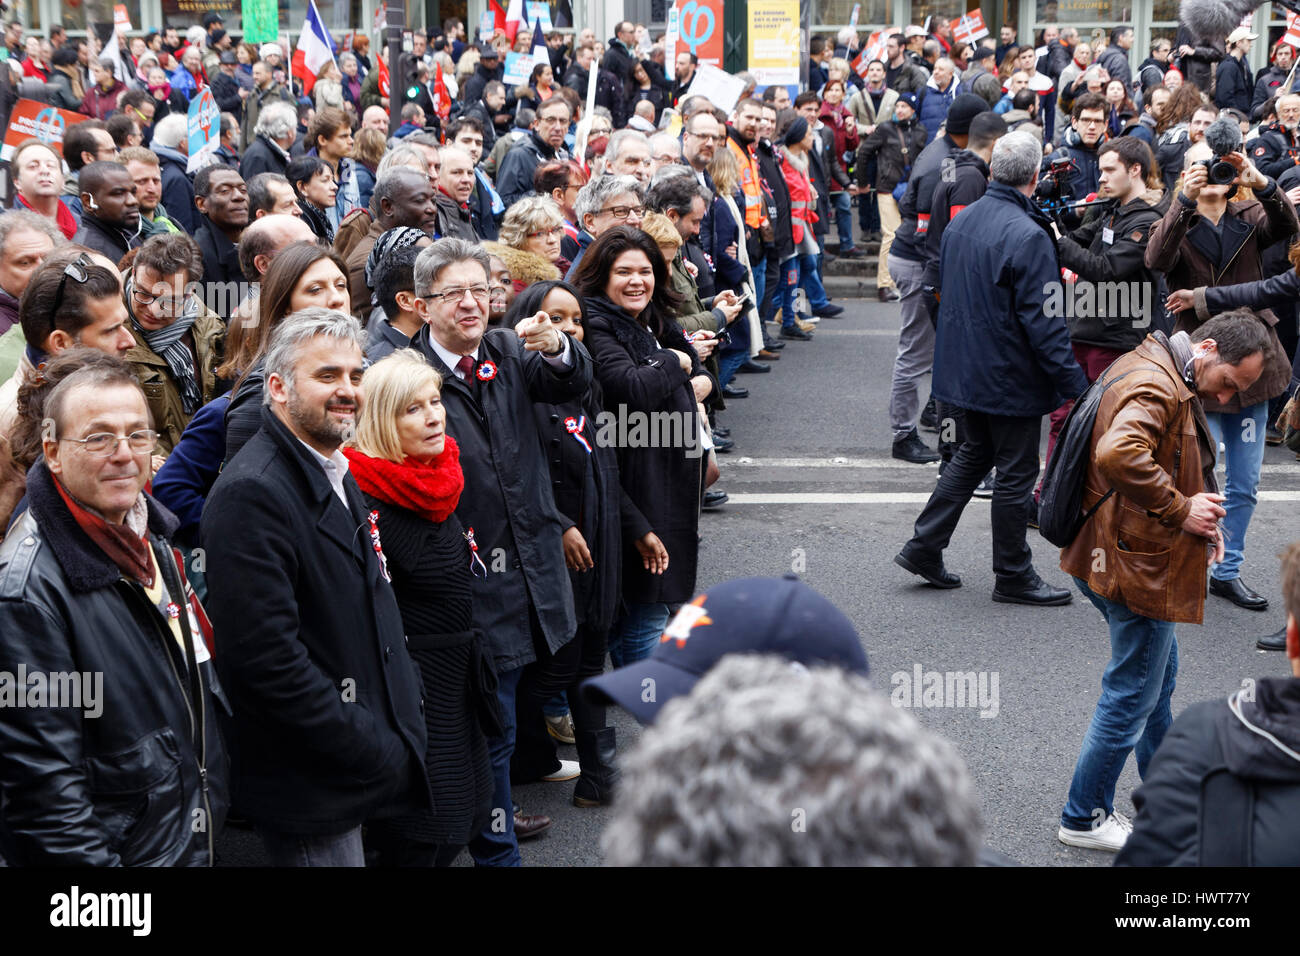 Parade for the 6th republic with Jean-Luc Melenchon,Presidential Candidate, Chantal Mouffe, Raquel Garrido, Clémentine Autain,Eric Coquerel Stock Photo